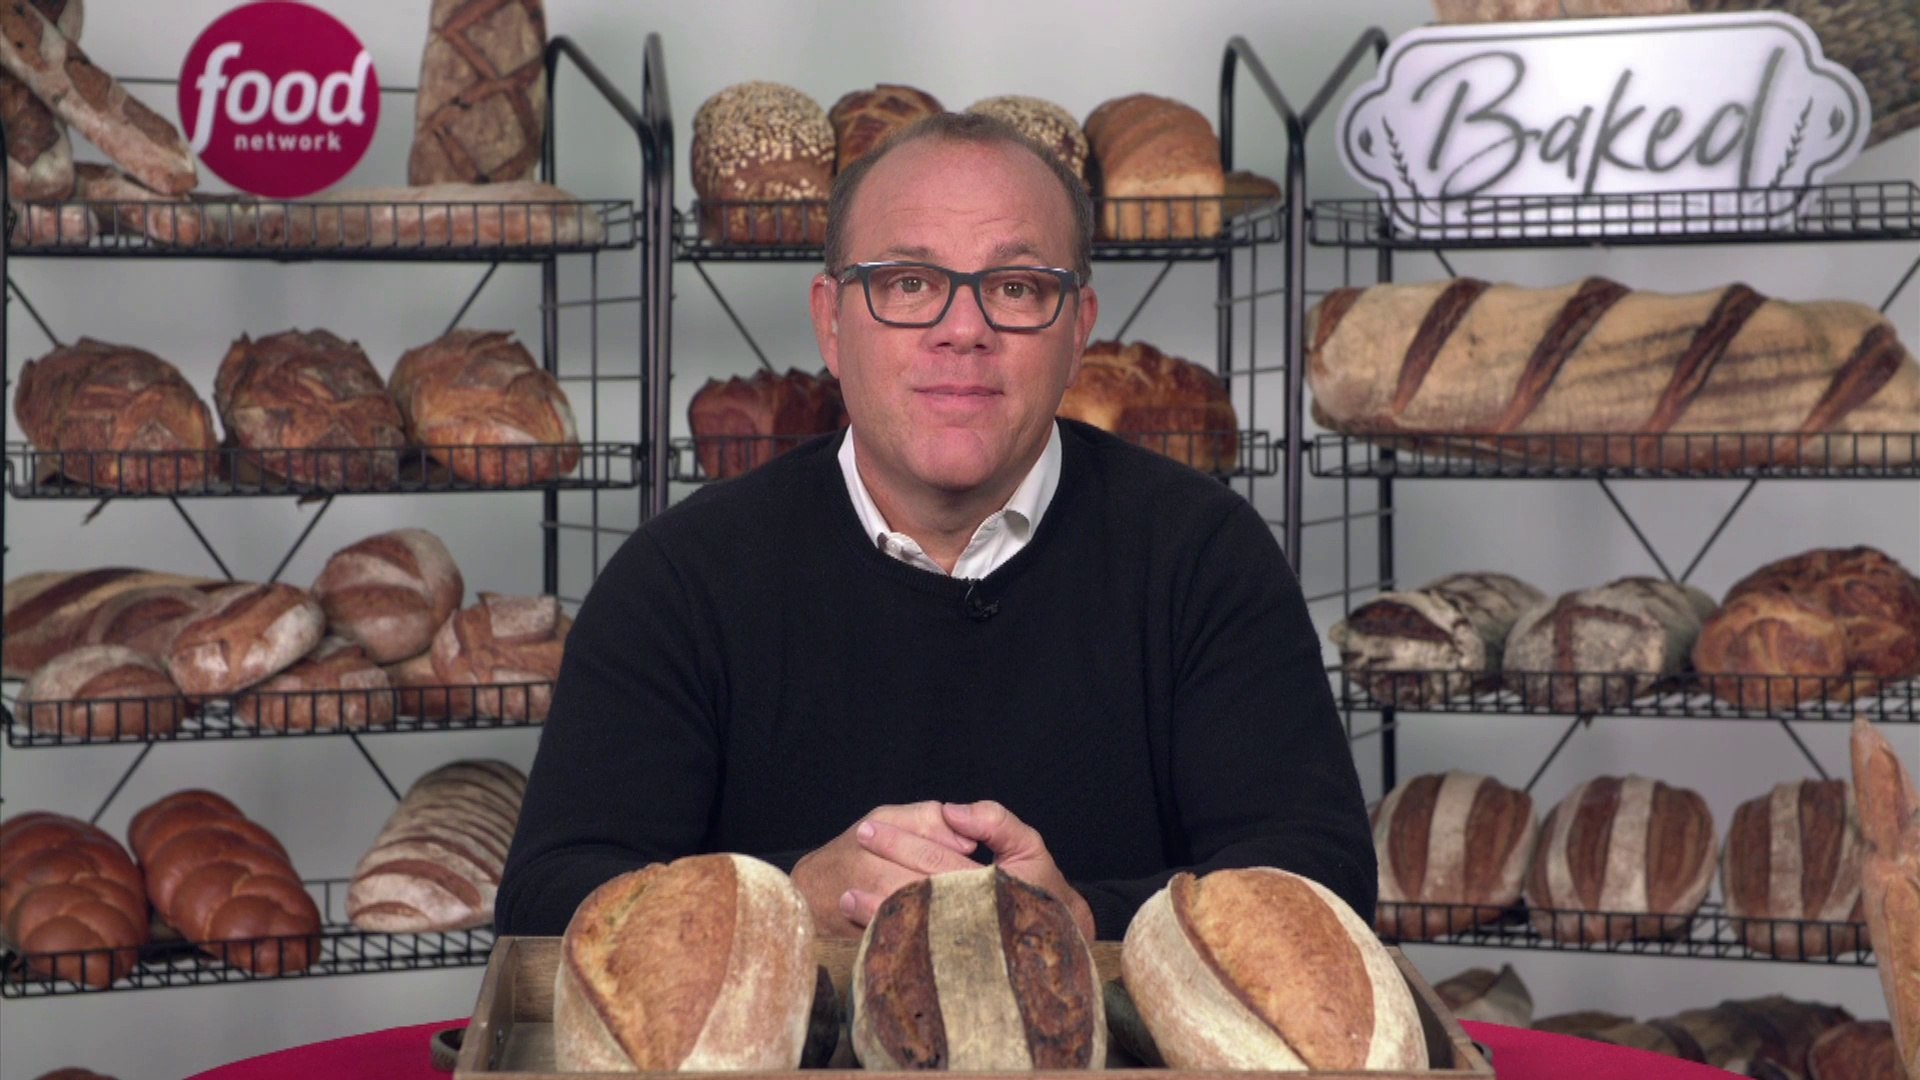 IR Interview: Tom Papa For "Baked" [Food Network] - video Dailymotion